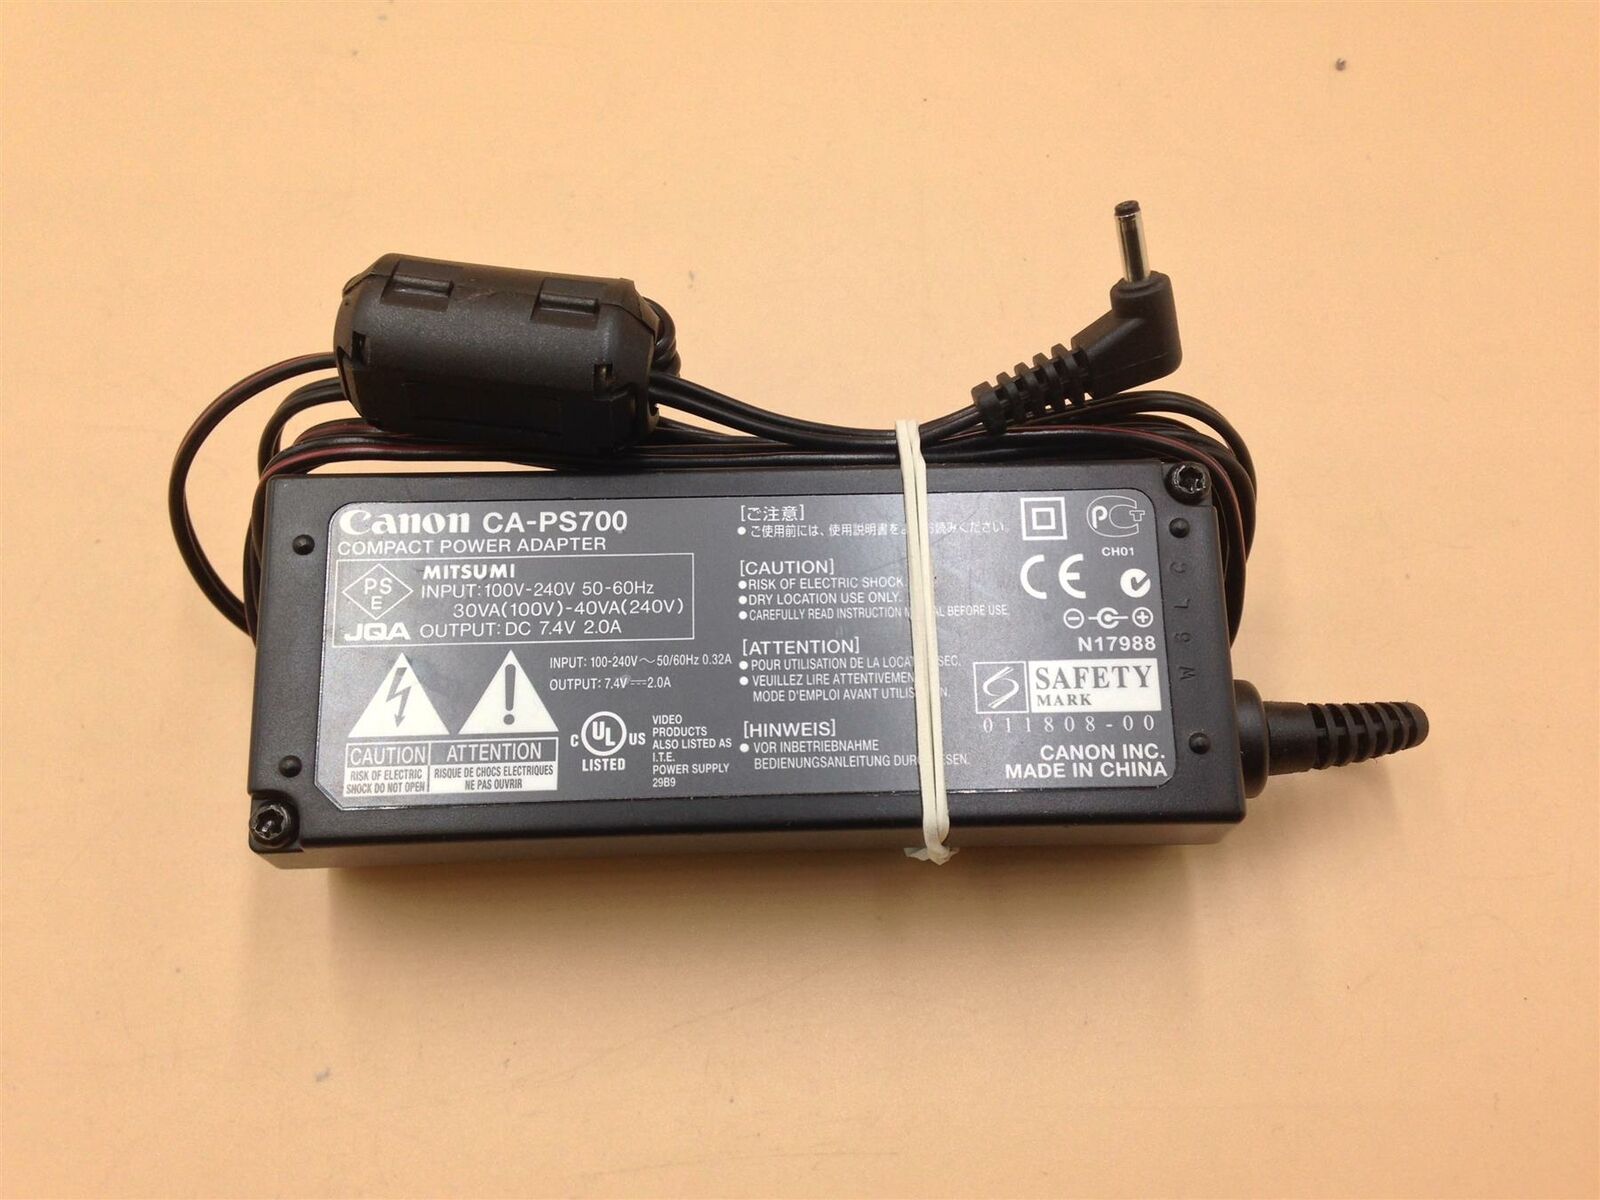 Canon CA-PS700 Compact AC Power Adapter 7.4V 2A 15W, Brand: Canon Compatible Brand: For Canon Type: AC Adapter Colo